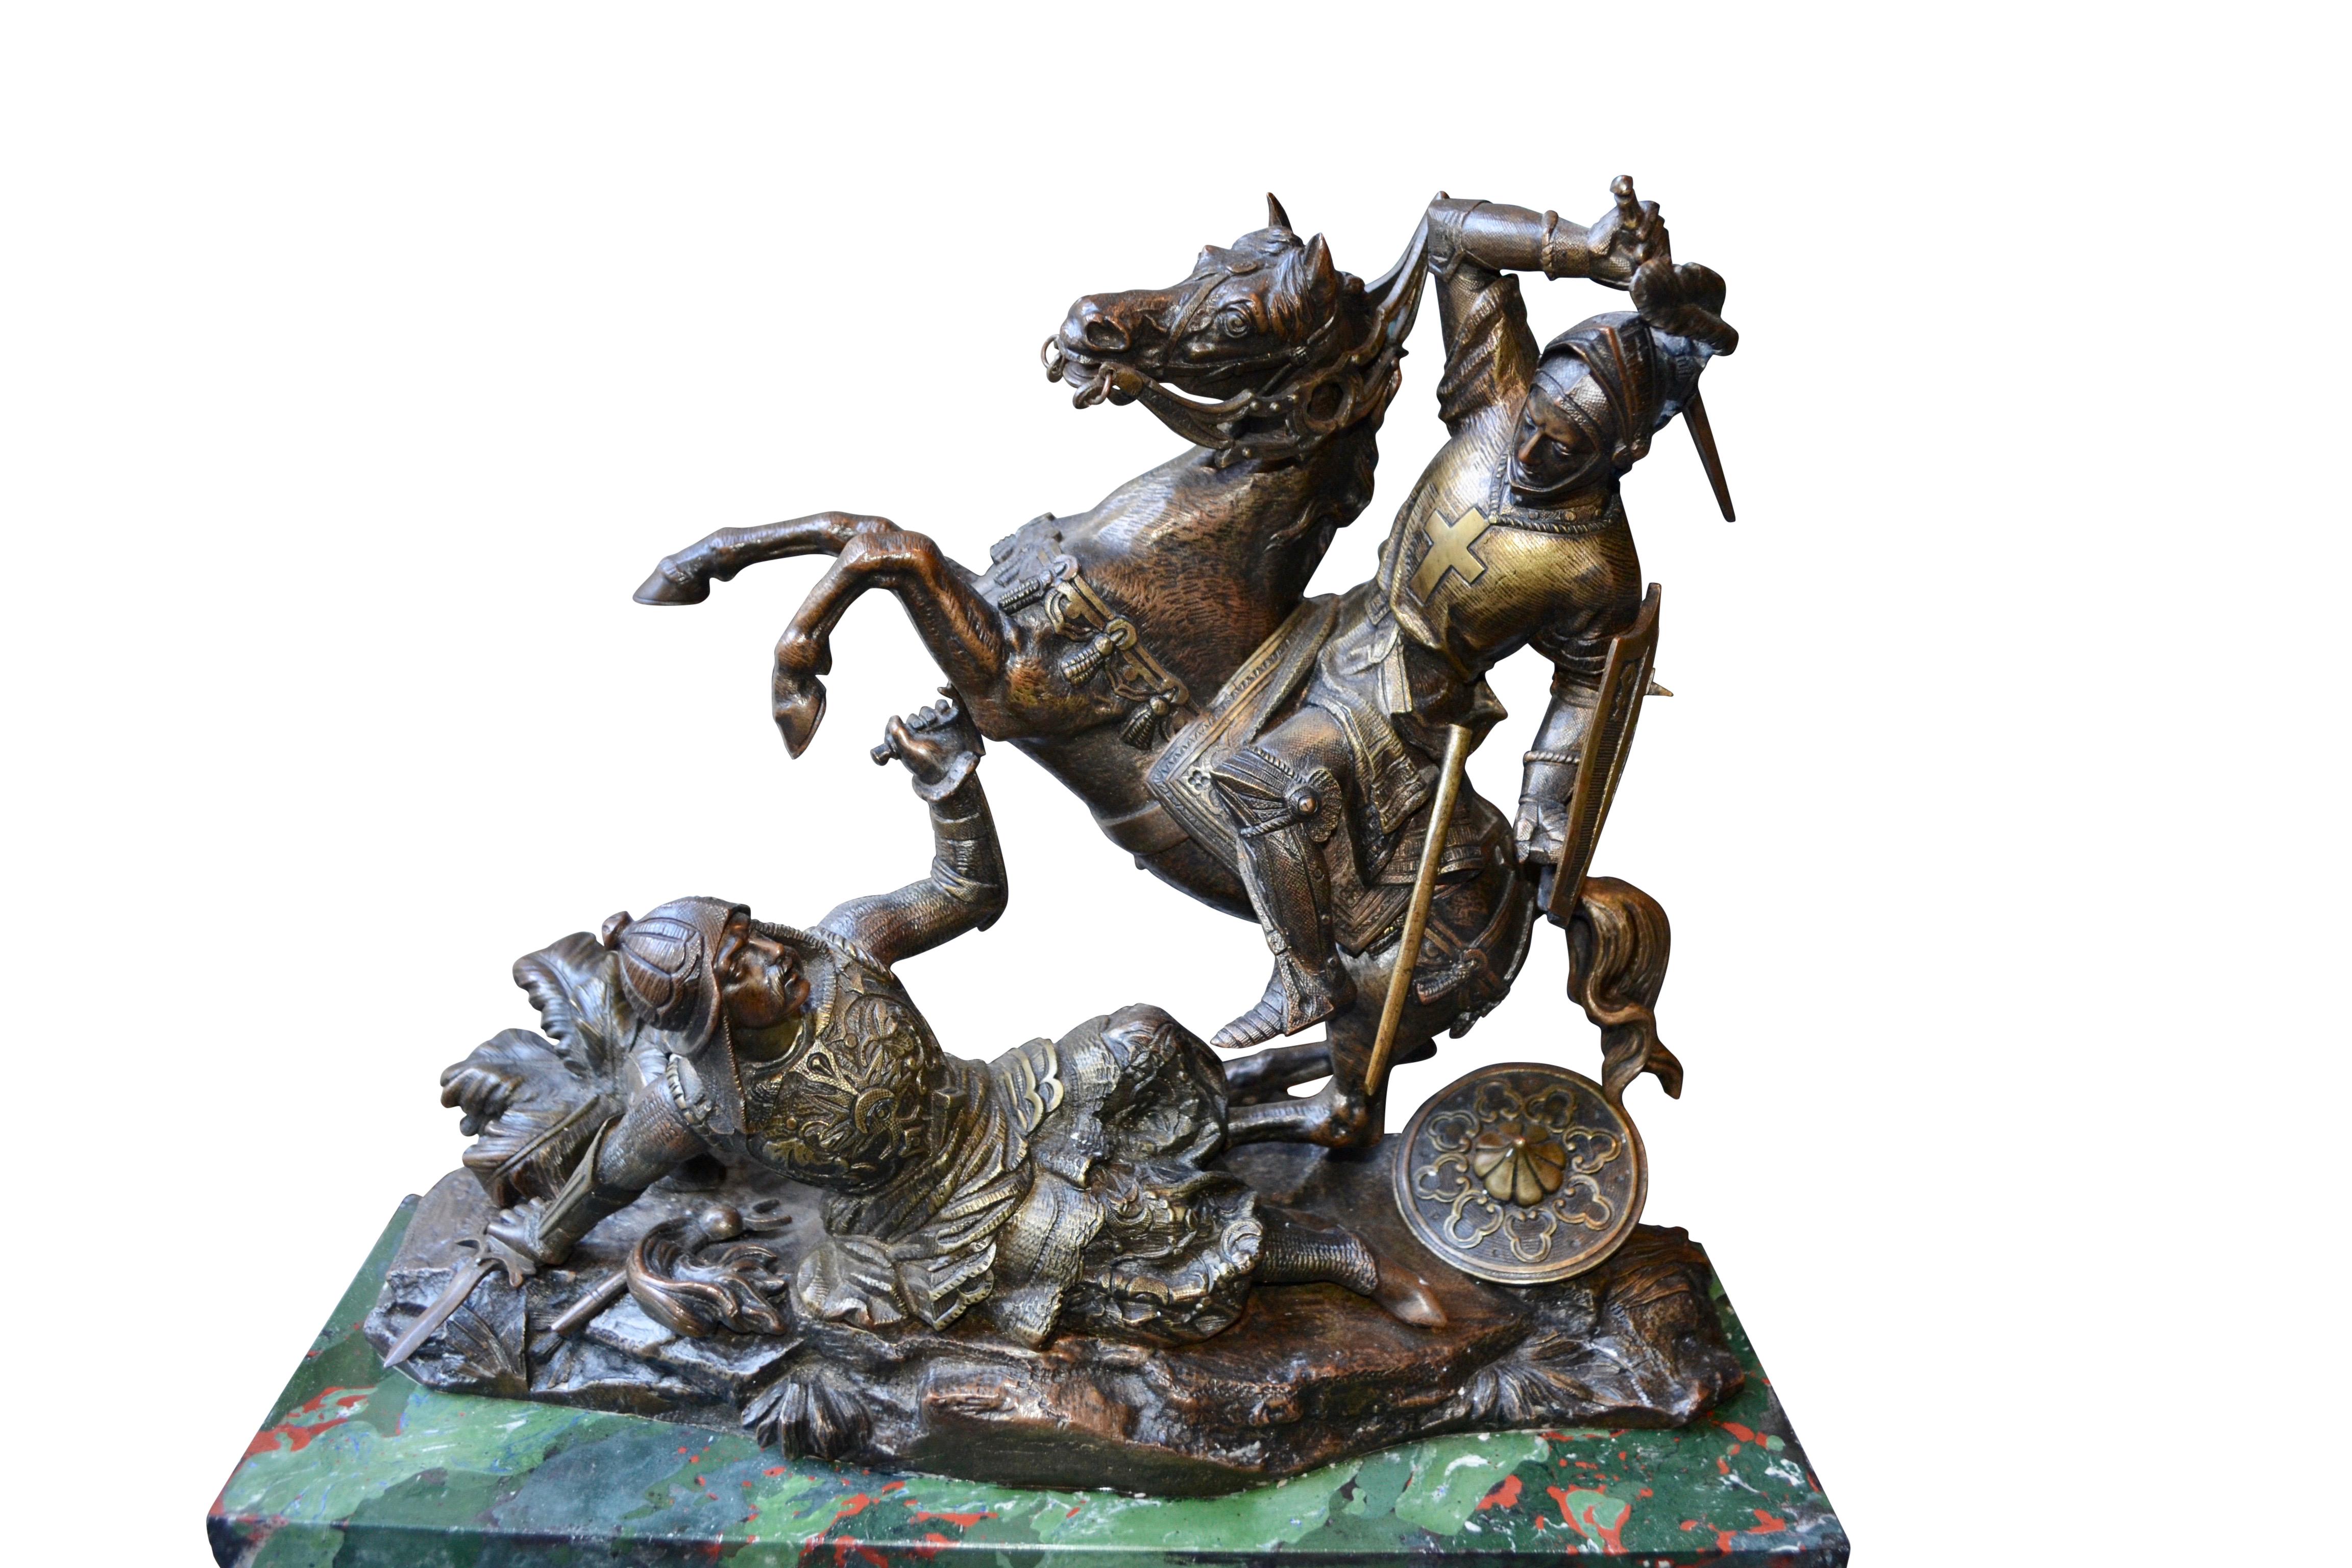 A dramatic patinated bronze statue depicting a mounted crusader on his rearing horse ready to strike a mortal blow to a fallen Saracen lying beneath him on a rocky landscape. In a desperate attempt to defend himself the Saracen is shown thrusting